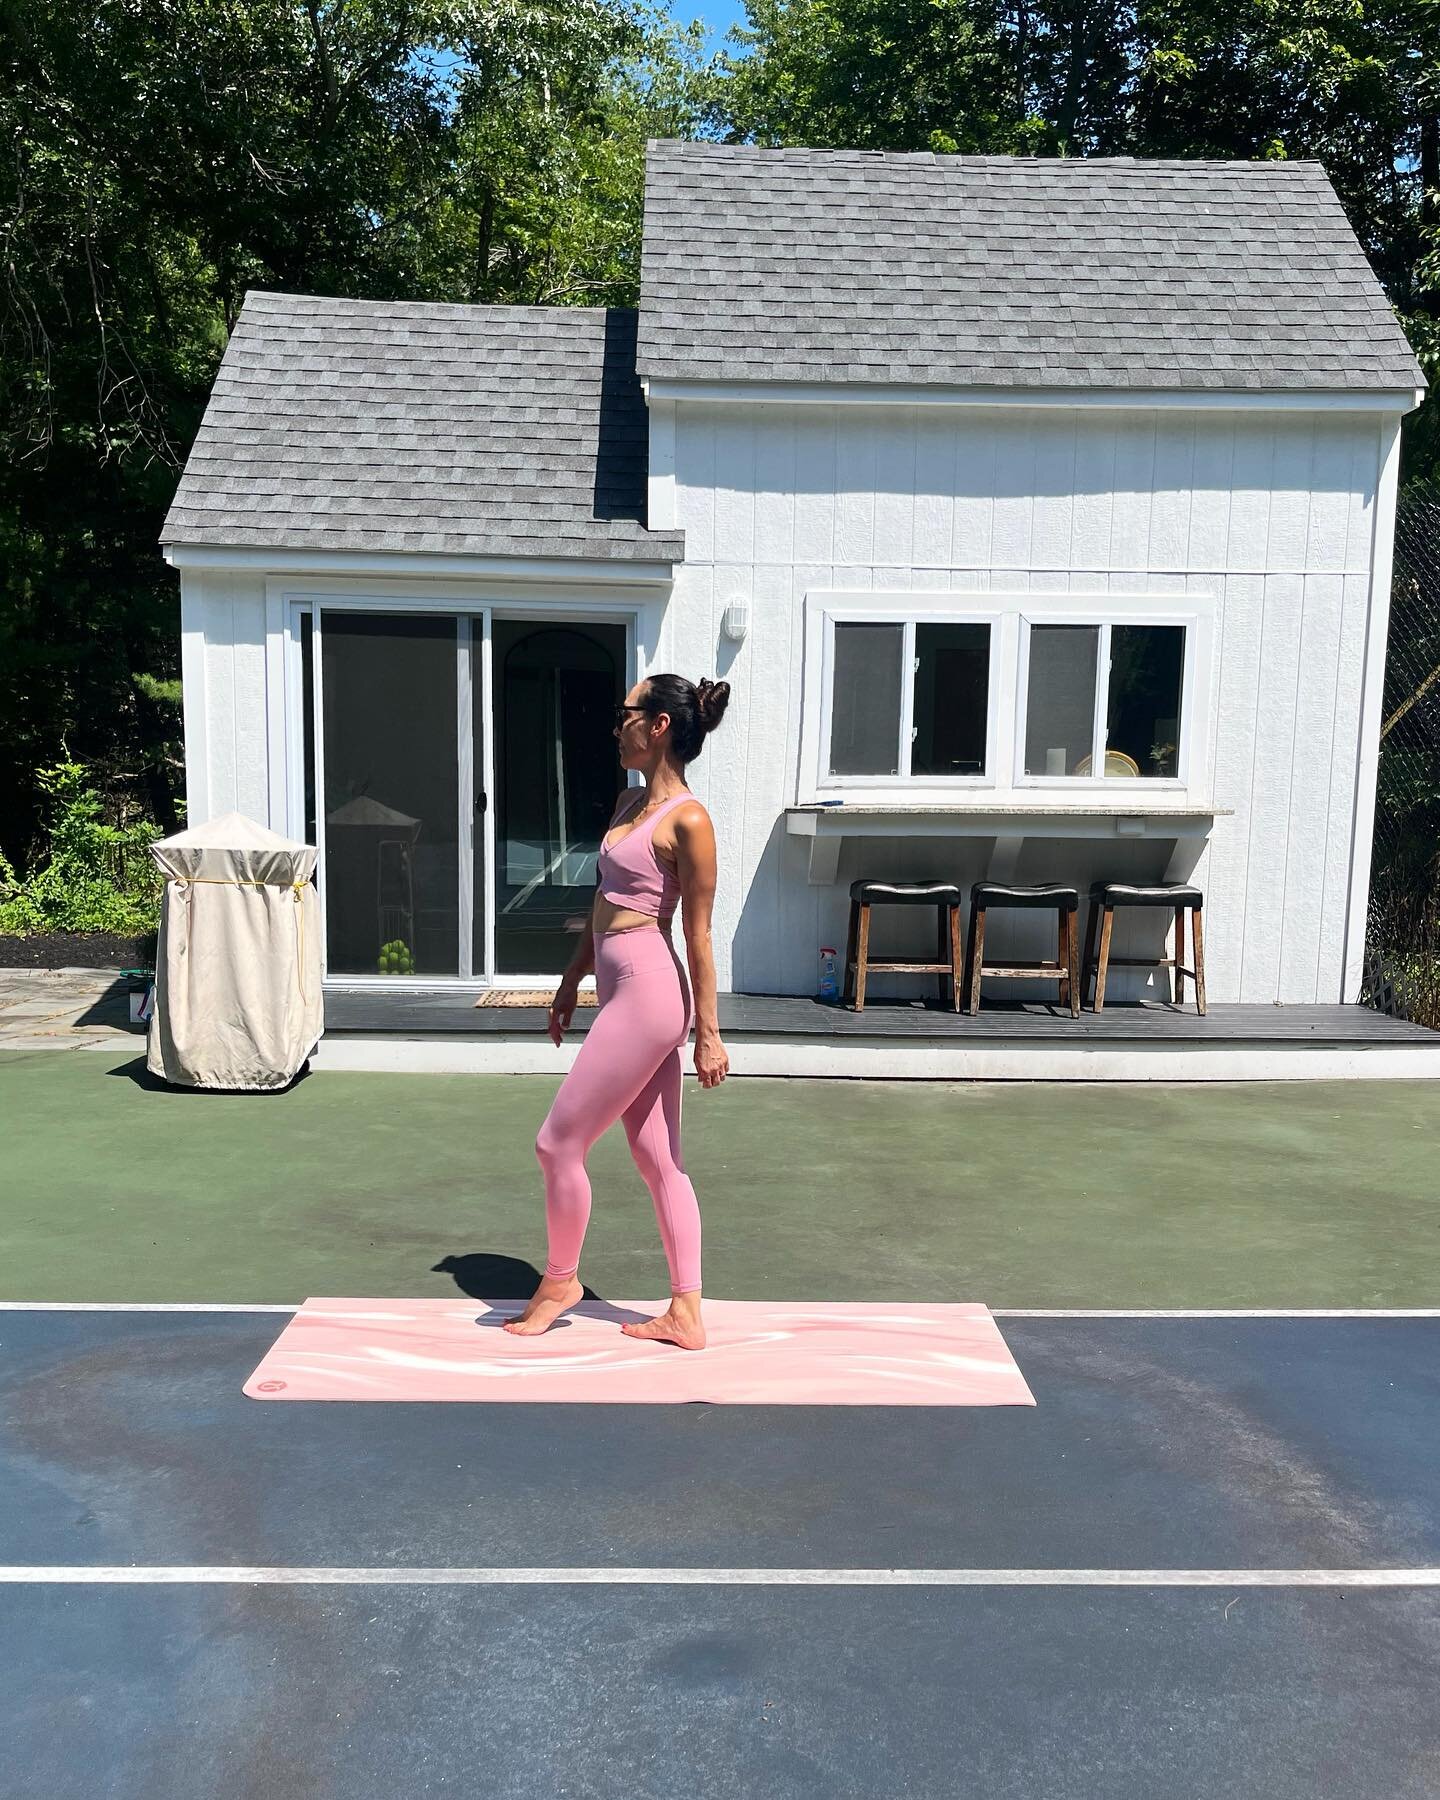 💗A pop of pink in my latest @splits59 gear! I'm utterly obsessed with their new ballet-inspired capsule - it's a barre lover's dream! 🩰💖

Thrilled to be partnering again with @splits59, an amazing brand that encouraged and supported me so much whe